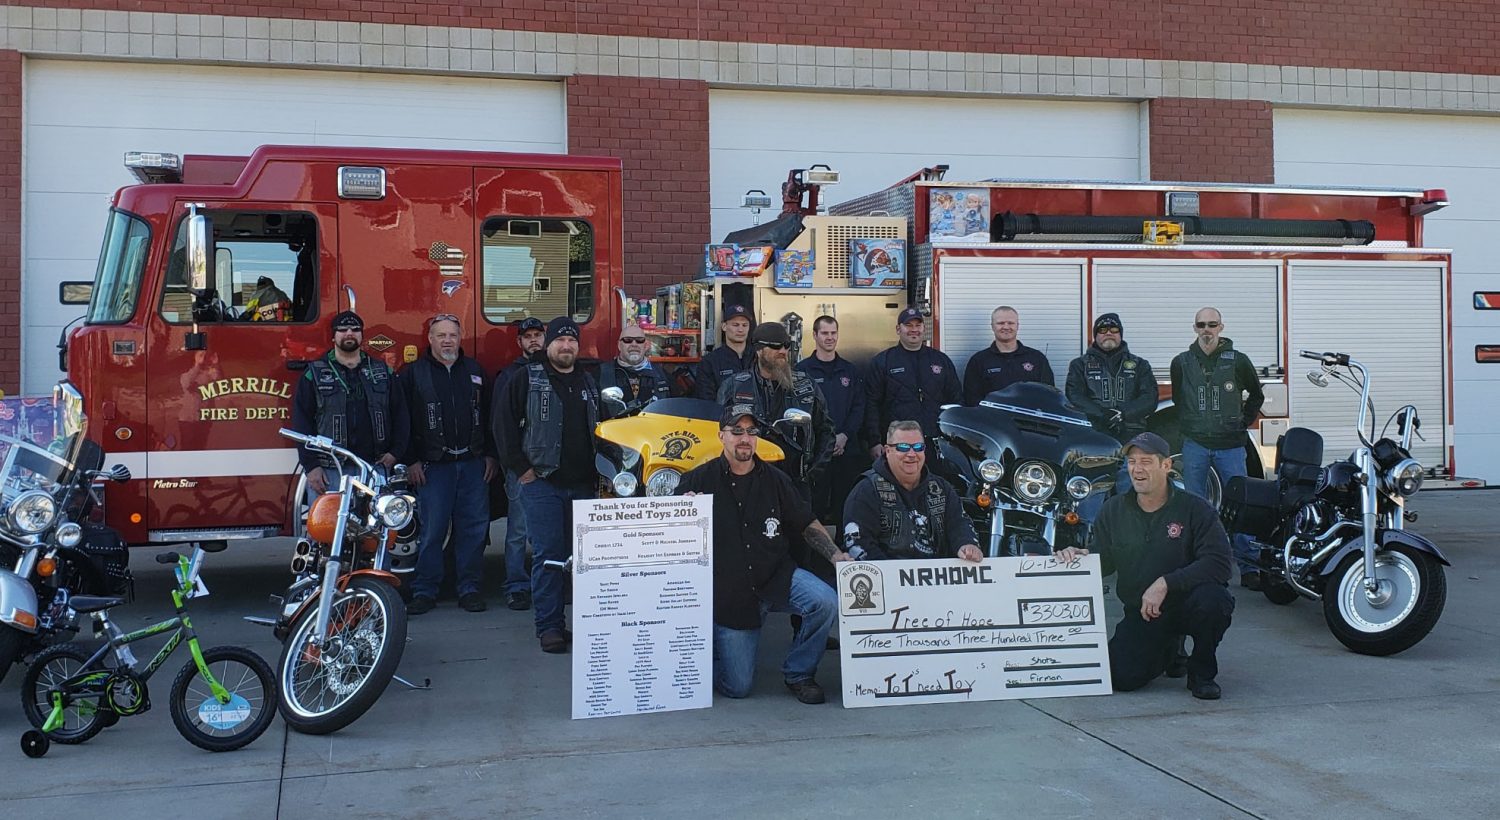 Local motorcycle club donates over $3,000 in support of MFD’s ‘Tree of Hope’